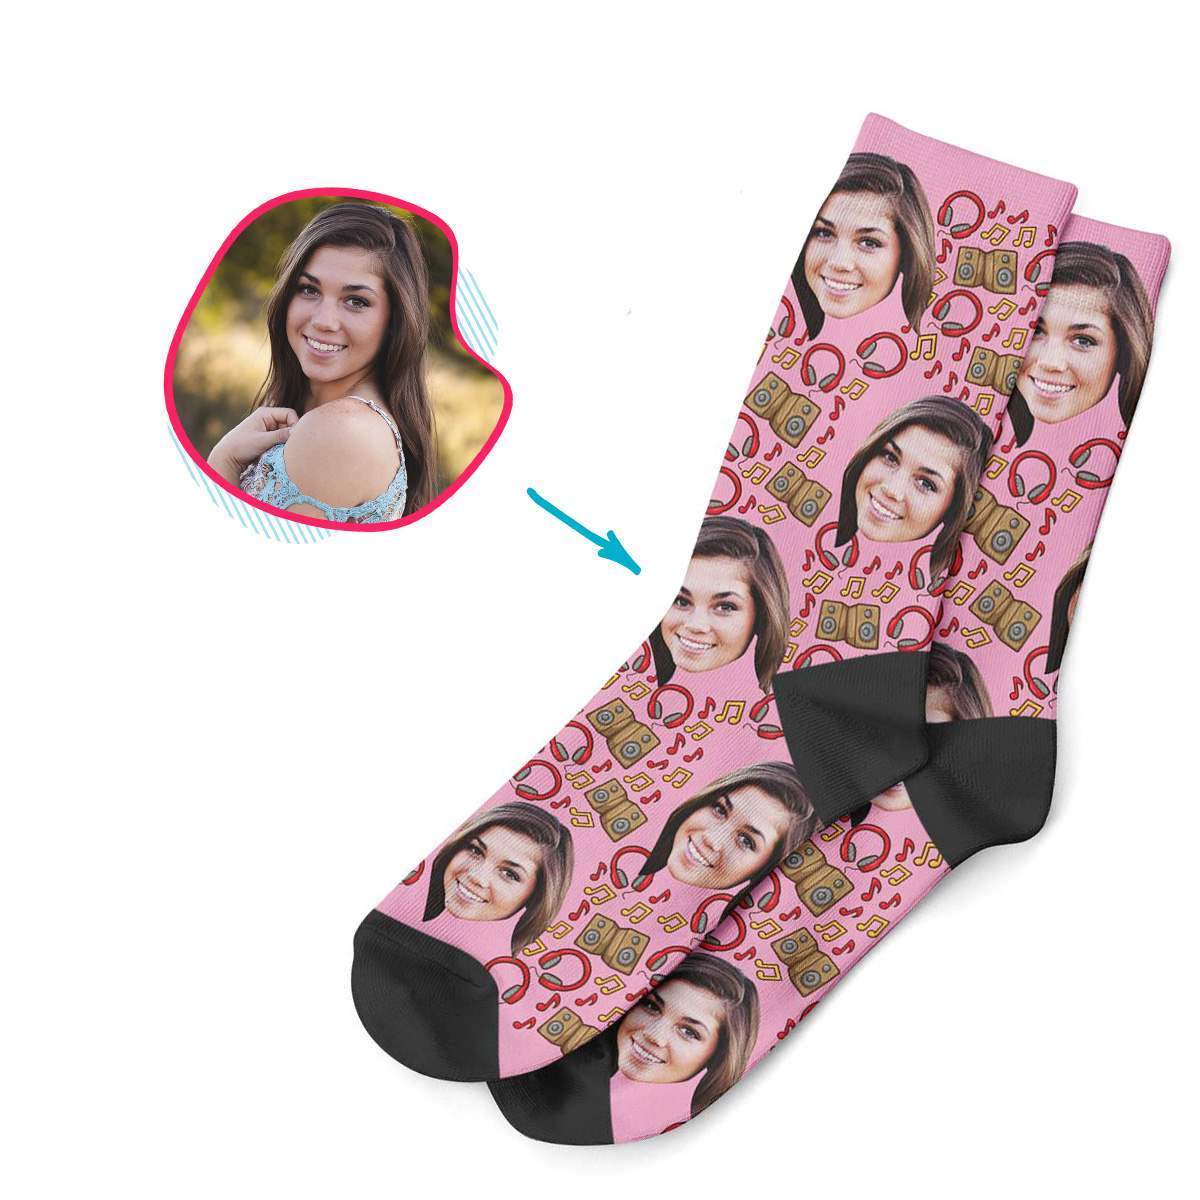 pink Music socks personalized with photo of face printed on them